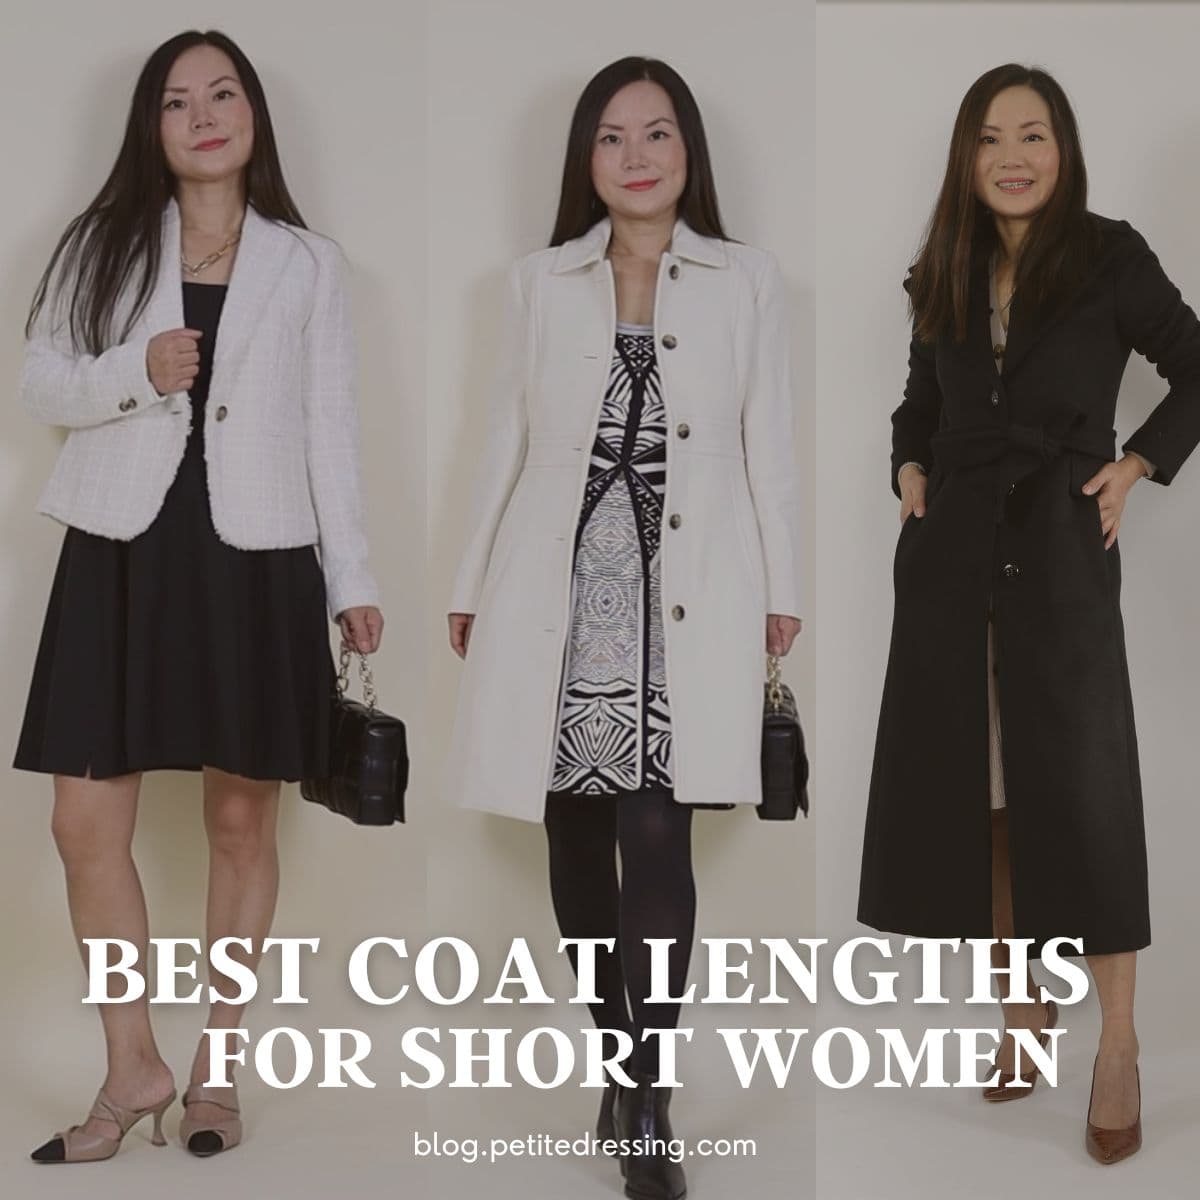 What length coats are best for short women - Petite Dressing